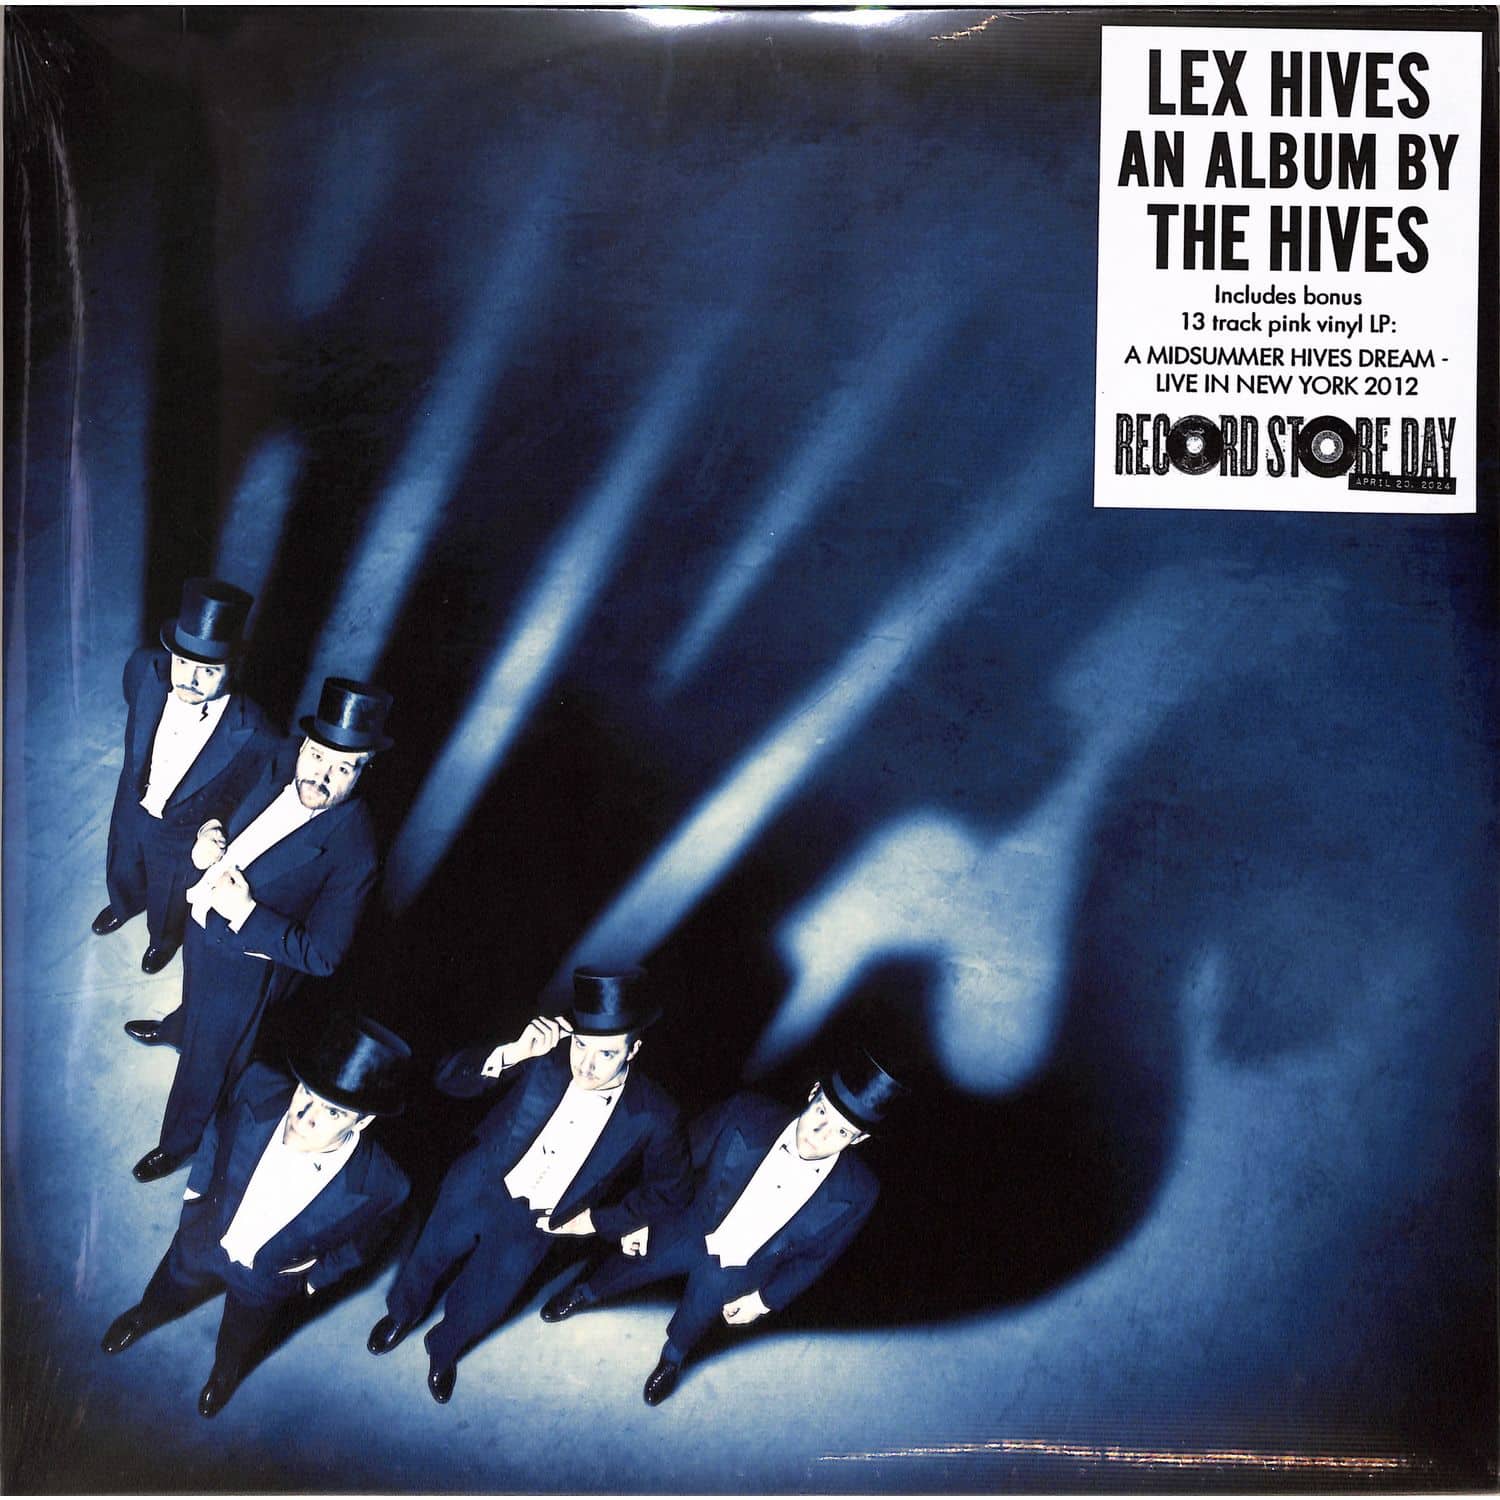 Hives - LEX HIVES AND A MIDSUMMER HIVES DREAM - LIVE IN NE 